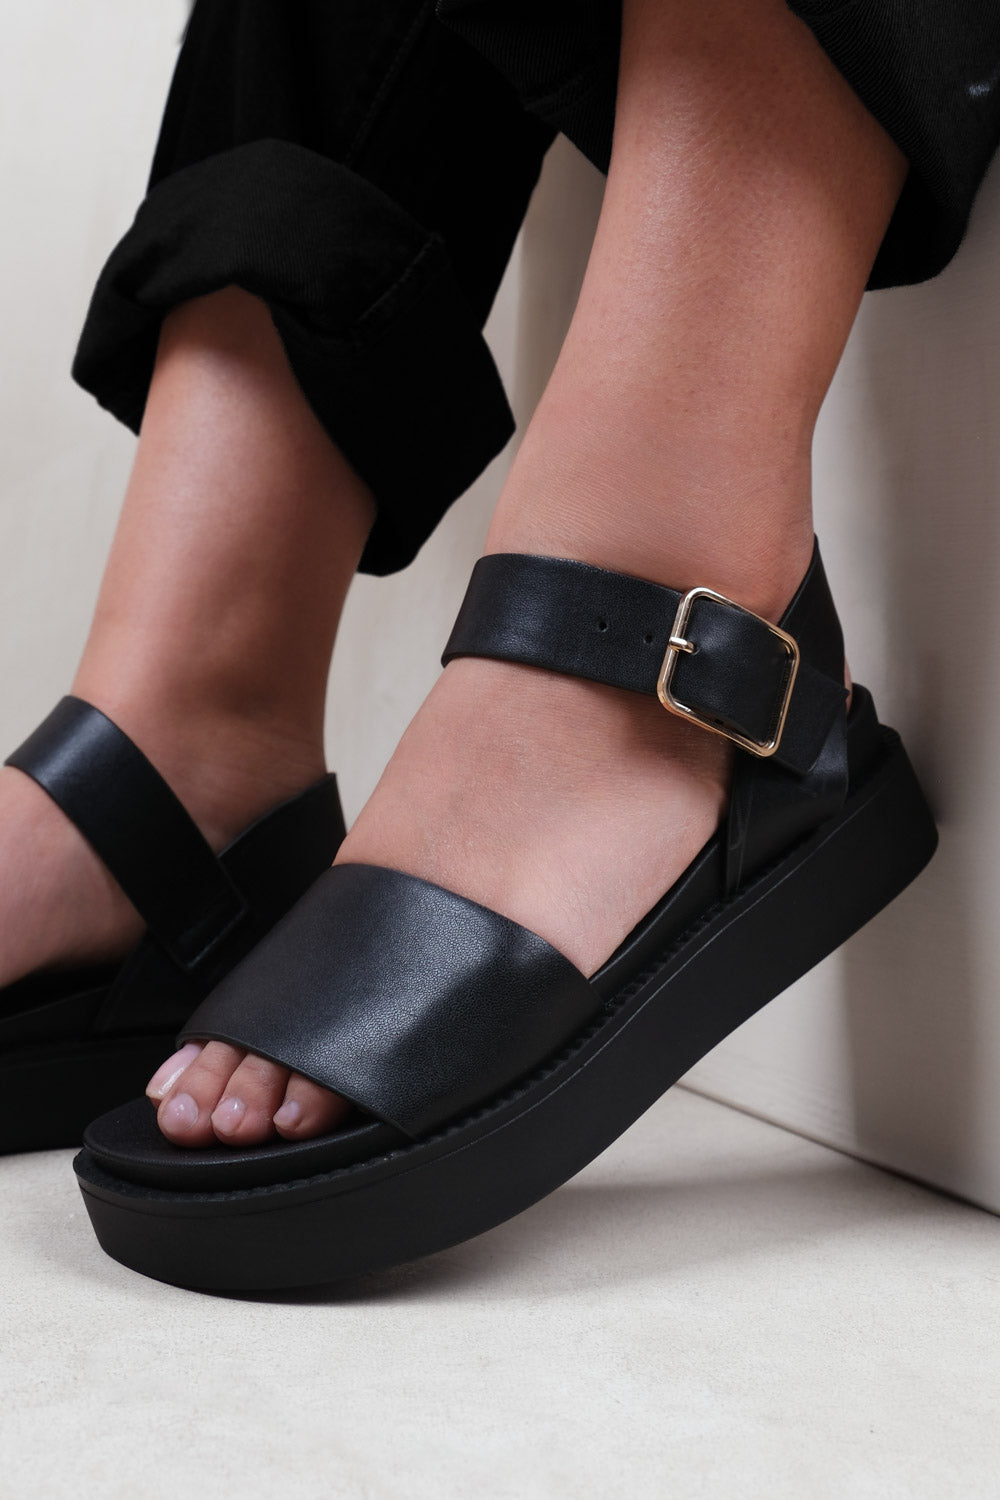 PHOENIX CLASSIC FLAT SANDALS WITH STRAP AND BUCKLE DETAIL IN BLACK FAUX LEATHER